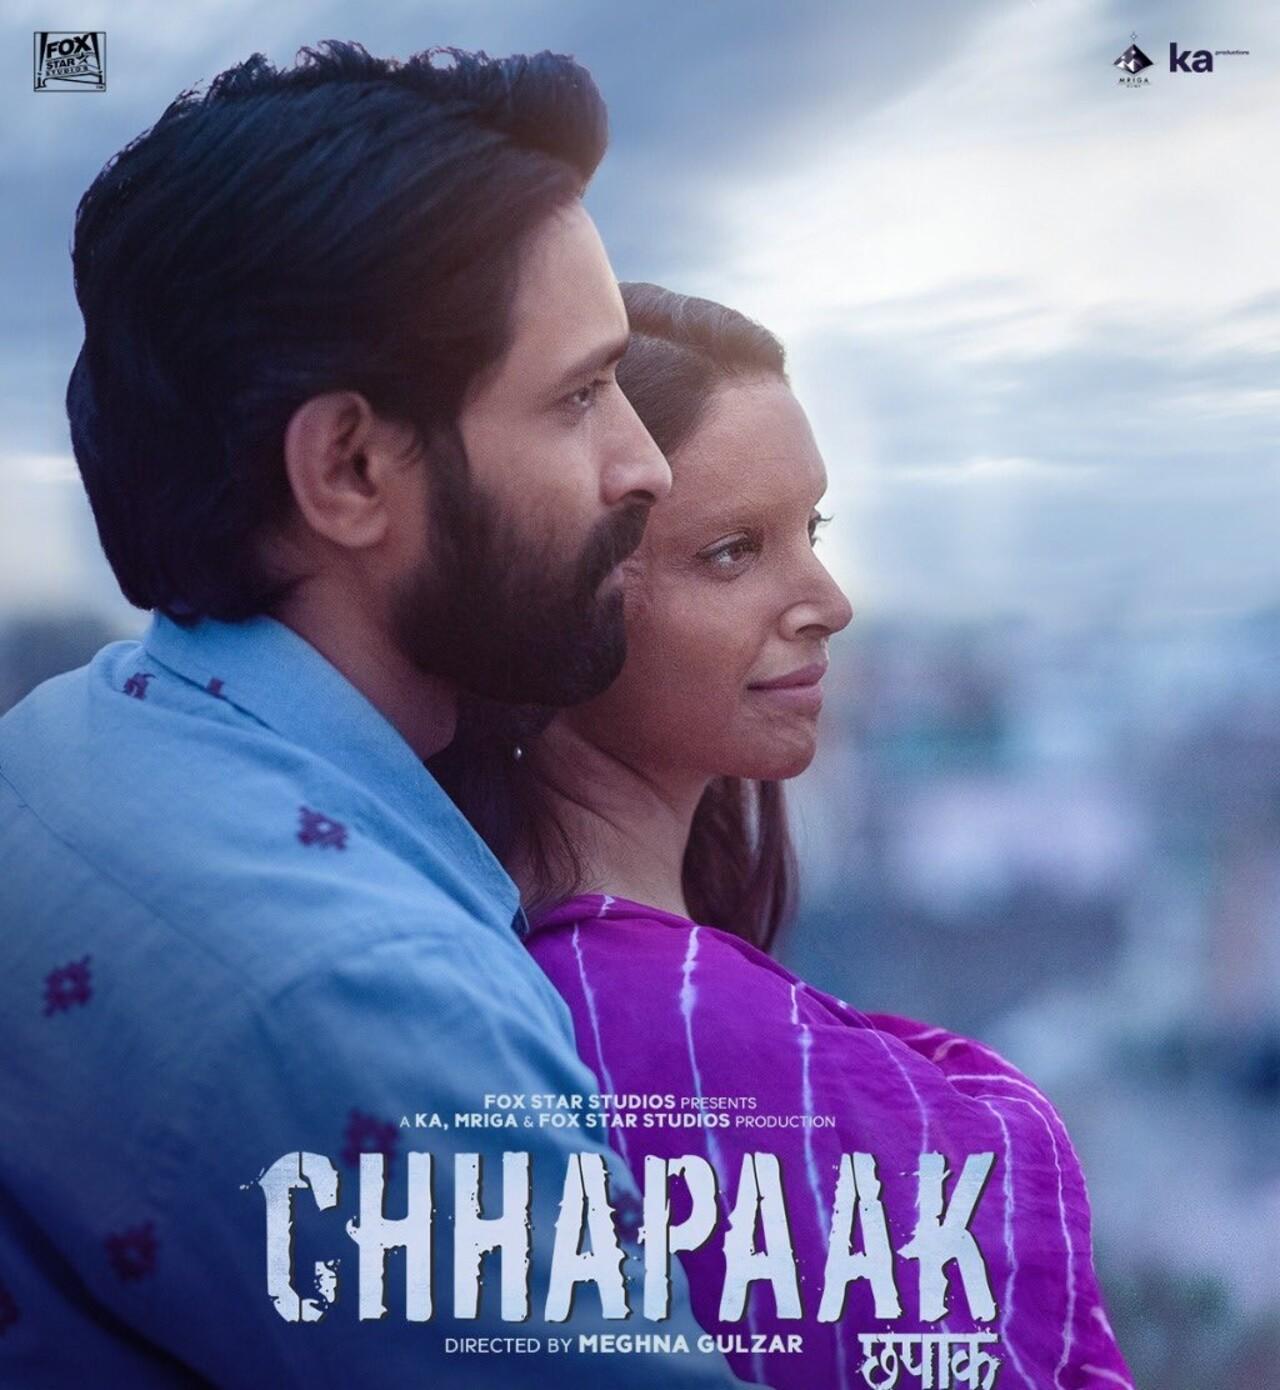 'Chhapaak' is based on the life of acid attack survivor Laxmi Agarwal. The film features Deepika Padukone as the female lead and explores Laxmi’s journey through the attack, societal pressure, and much more